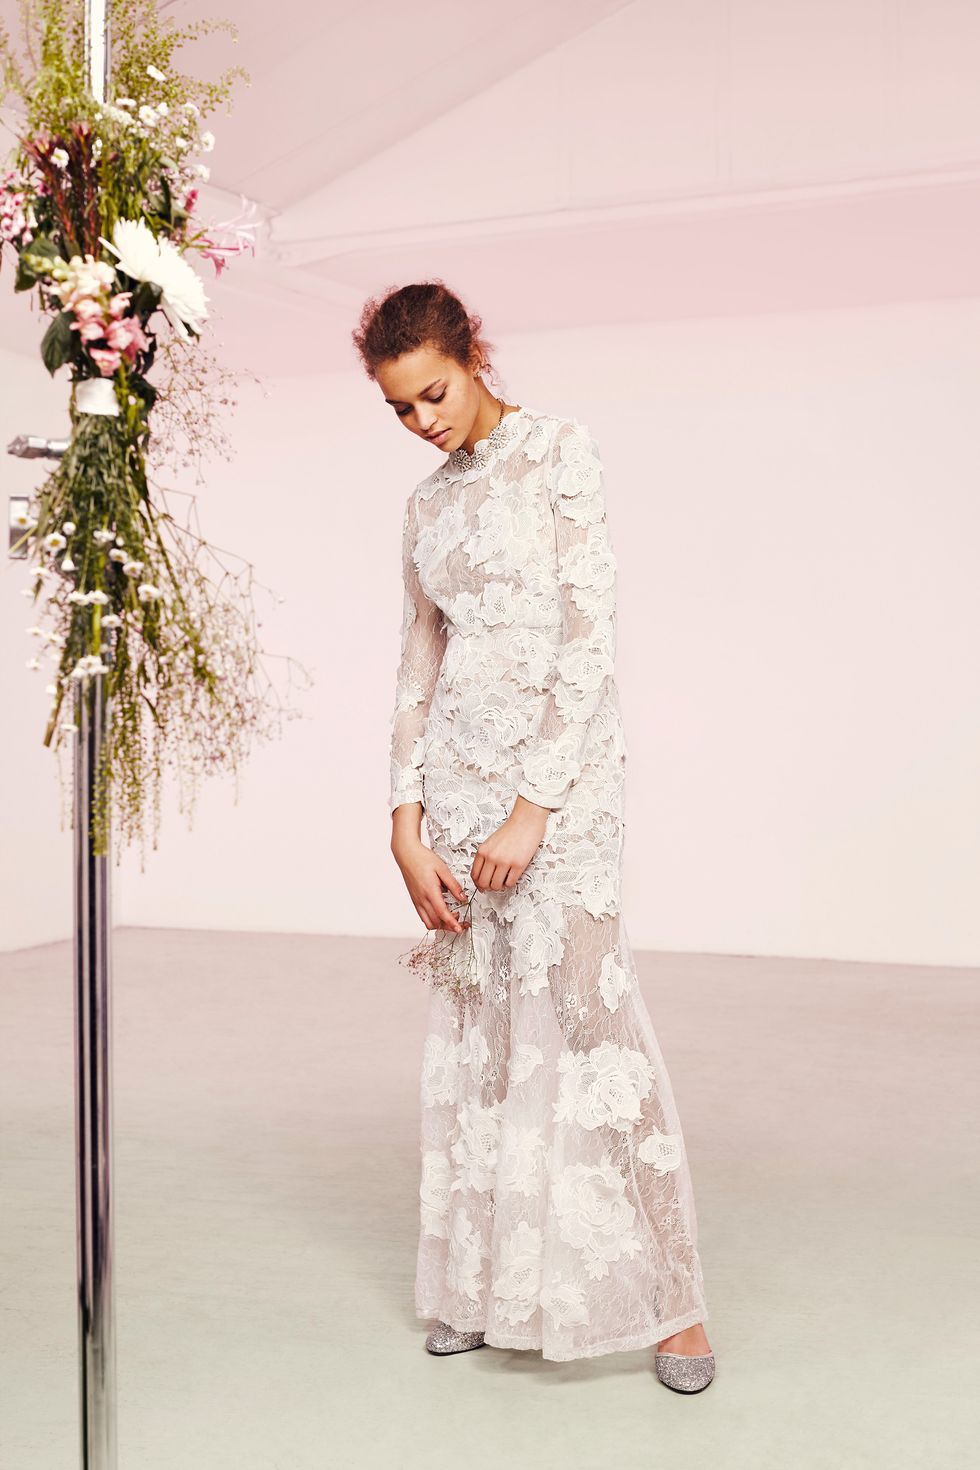 ASOS launches bridal collection of wedding dresses